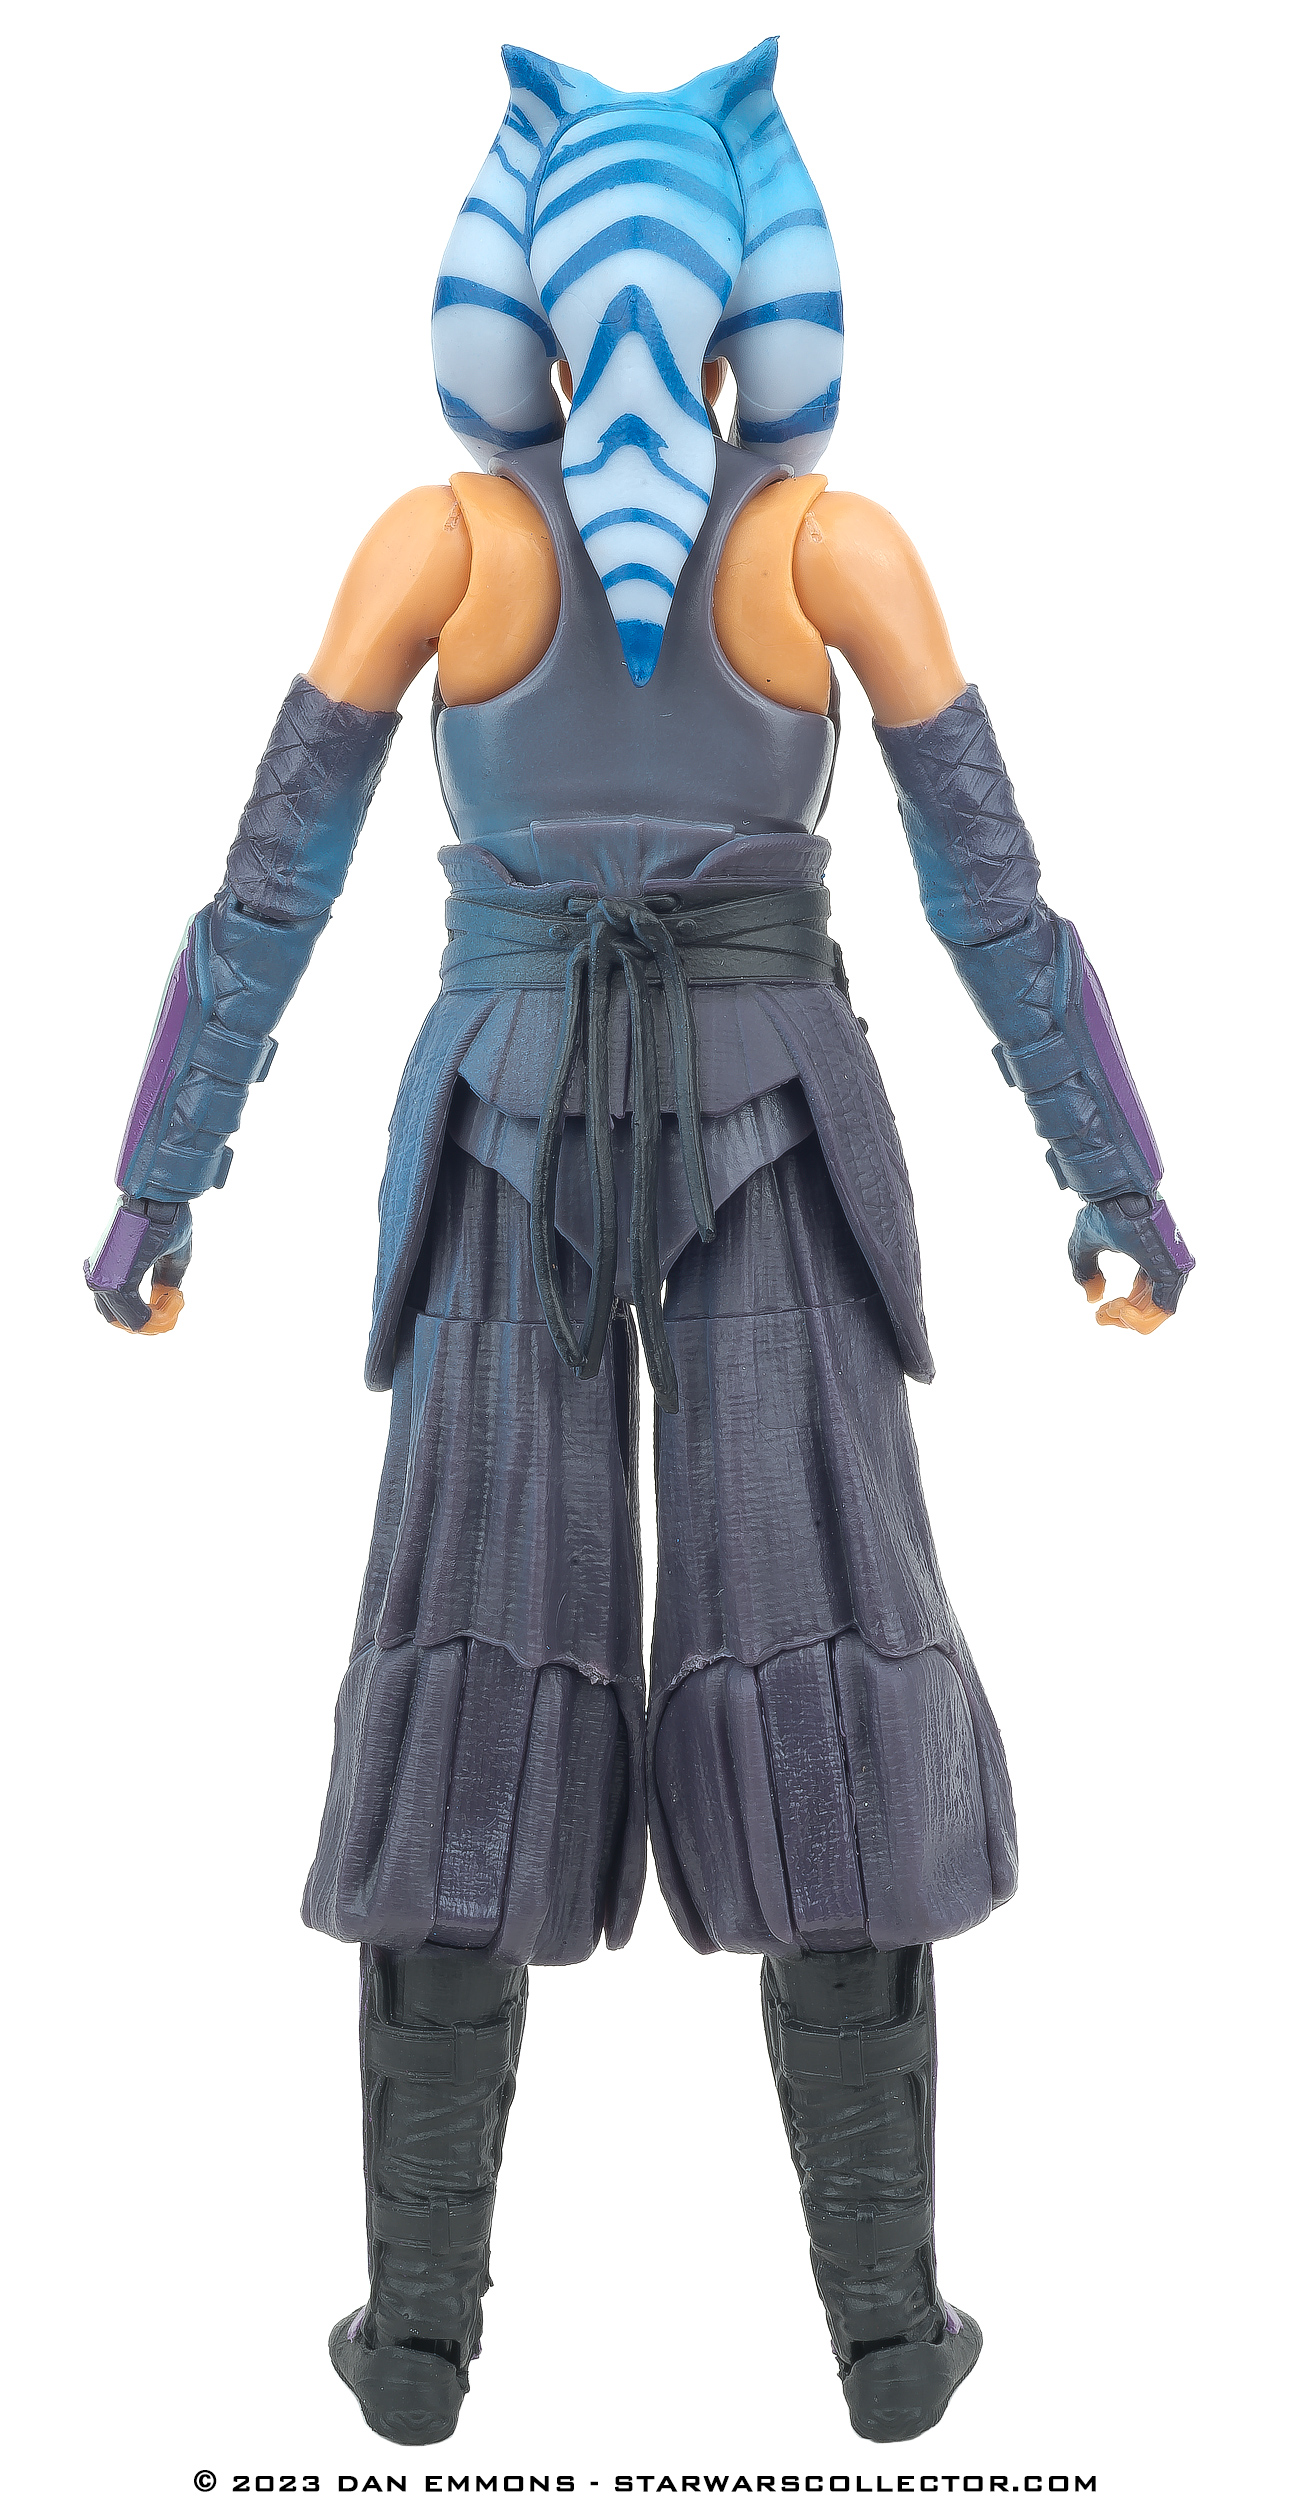 The Black Series 6-Inch Credit Collection Target Exclusive Ahsoka Tano